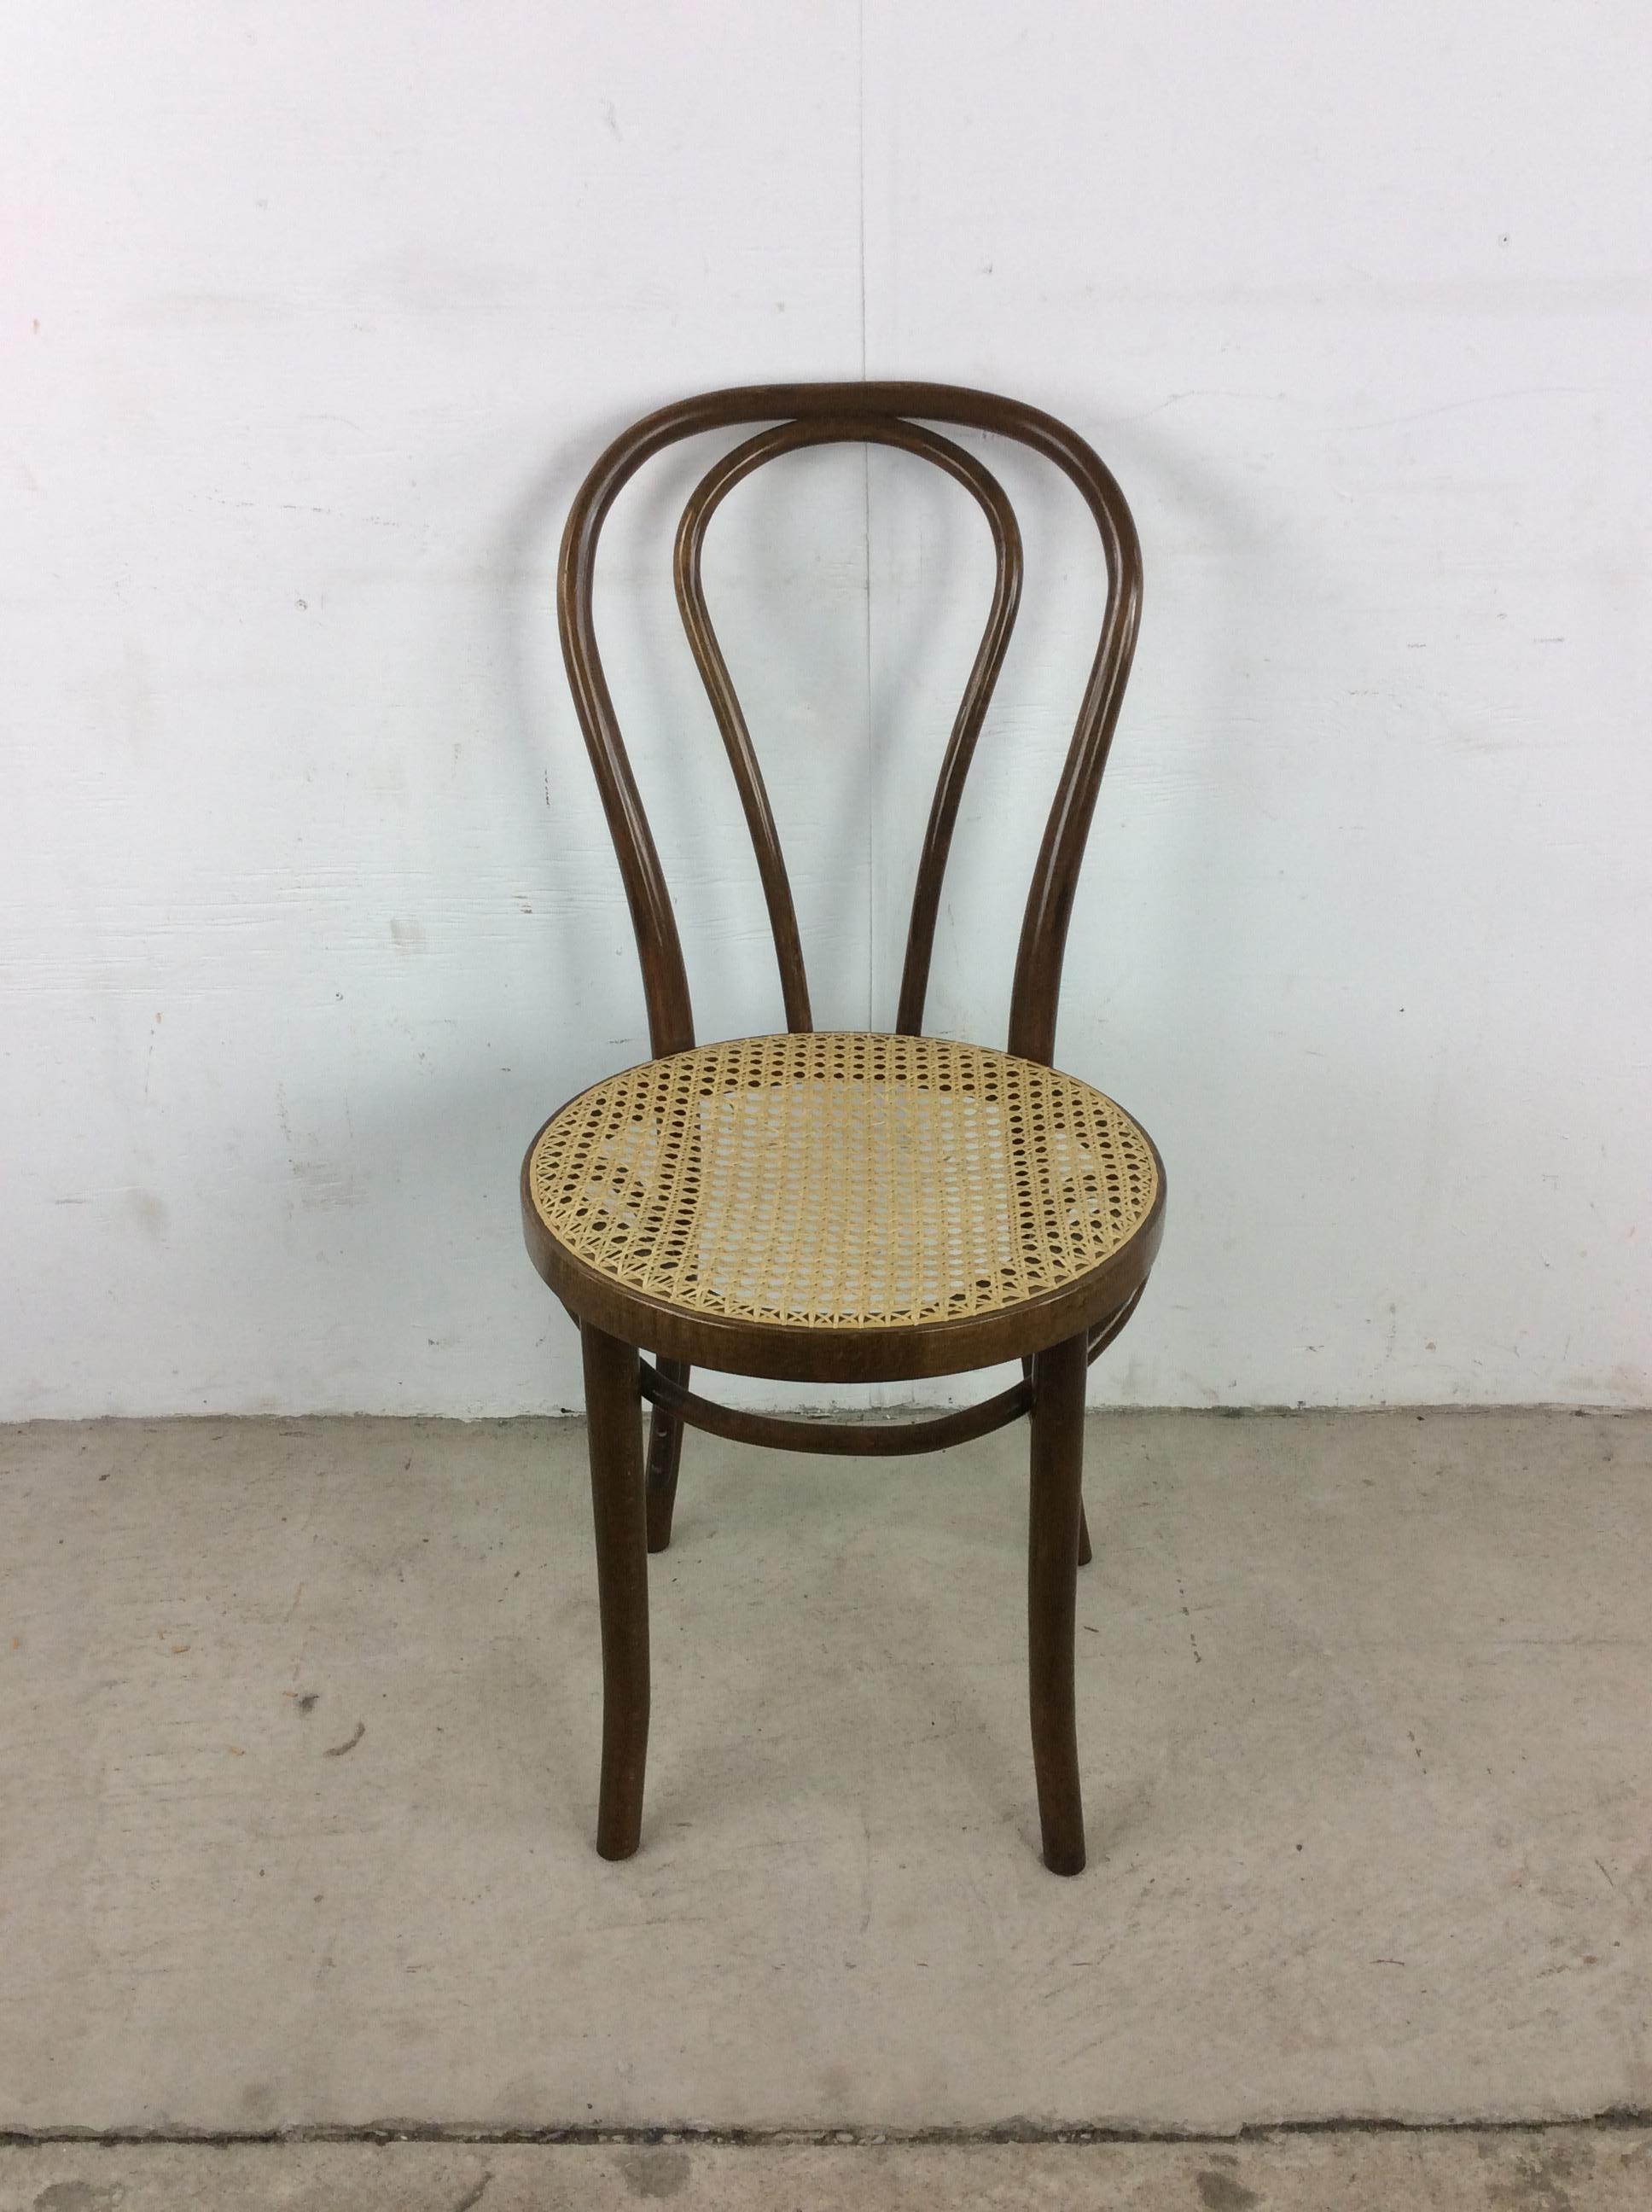 This vintage cafe chair in the style of Thonet features bentwood frame, caned seat, and tall tapered legs.  Complimentary rocking chair & bentwood ottoman available separately. 

Dimensions: 16w 17.5d 35h 18.5sh

Condition: Original finish on the